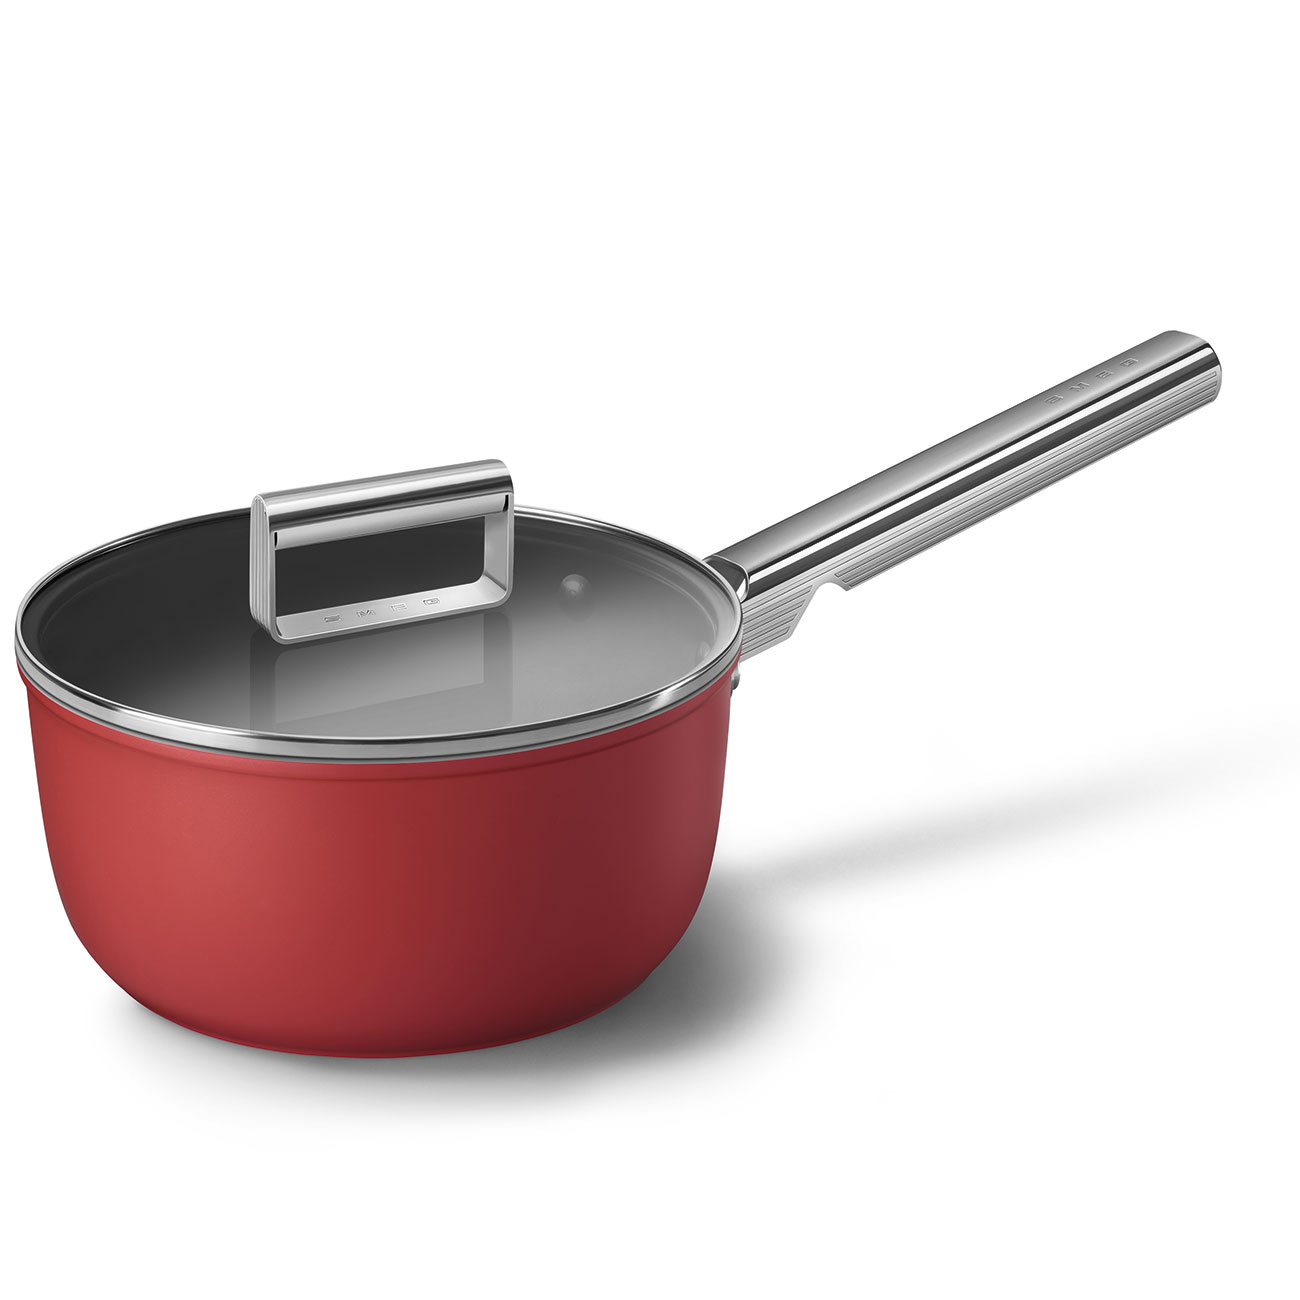 Smeg Red Non-stick Saucepan with glass lid and stainless steel handle_7